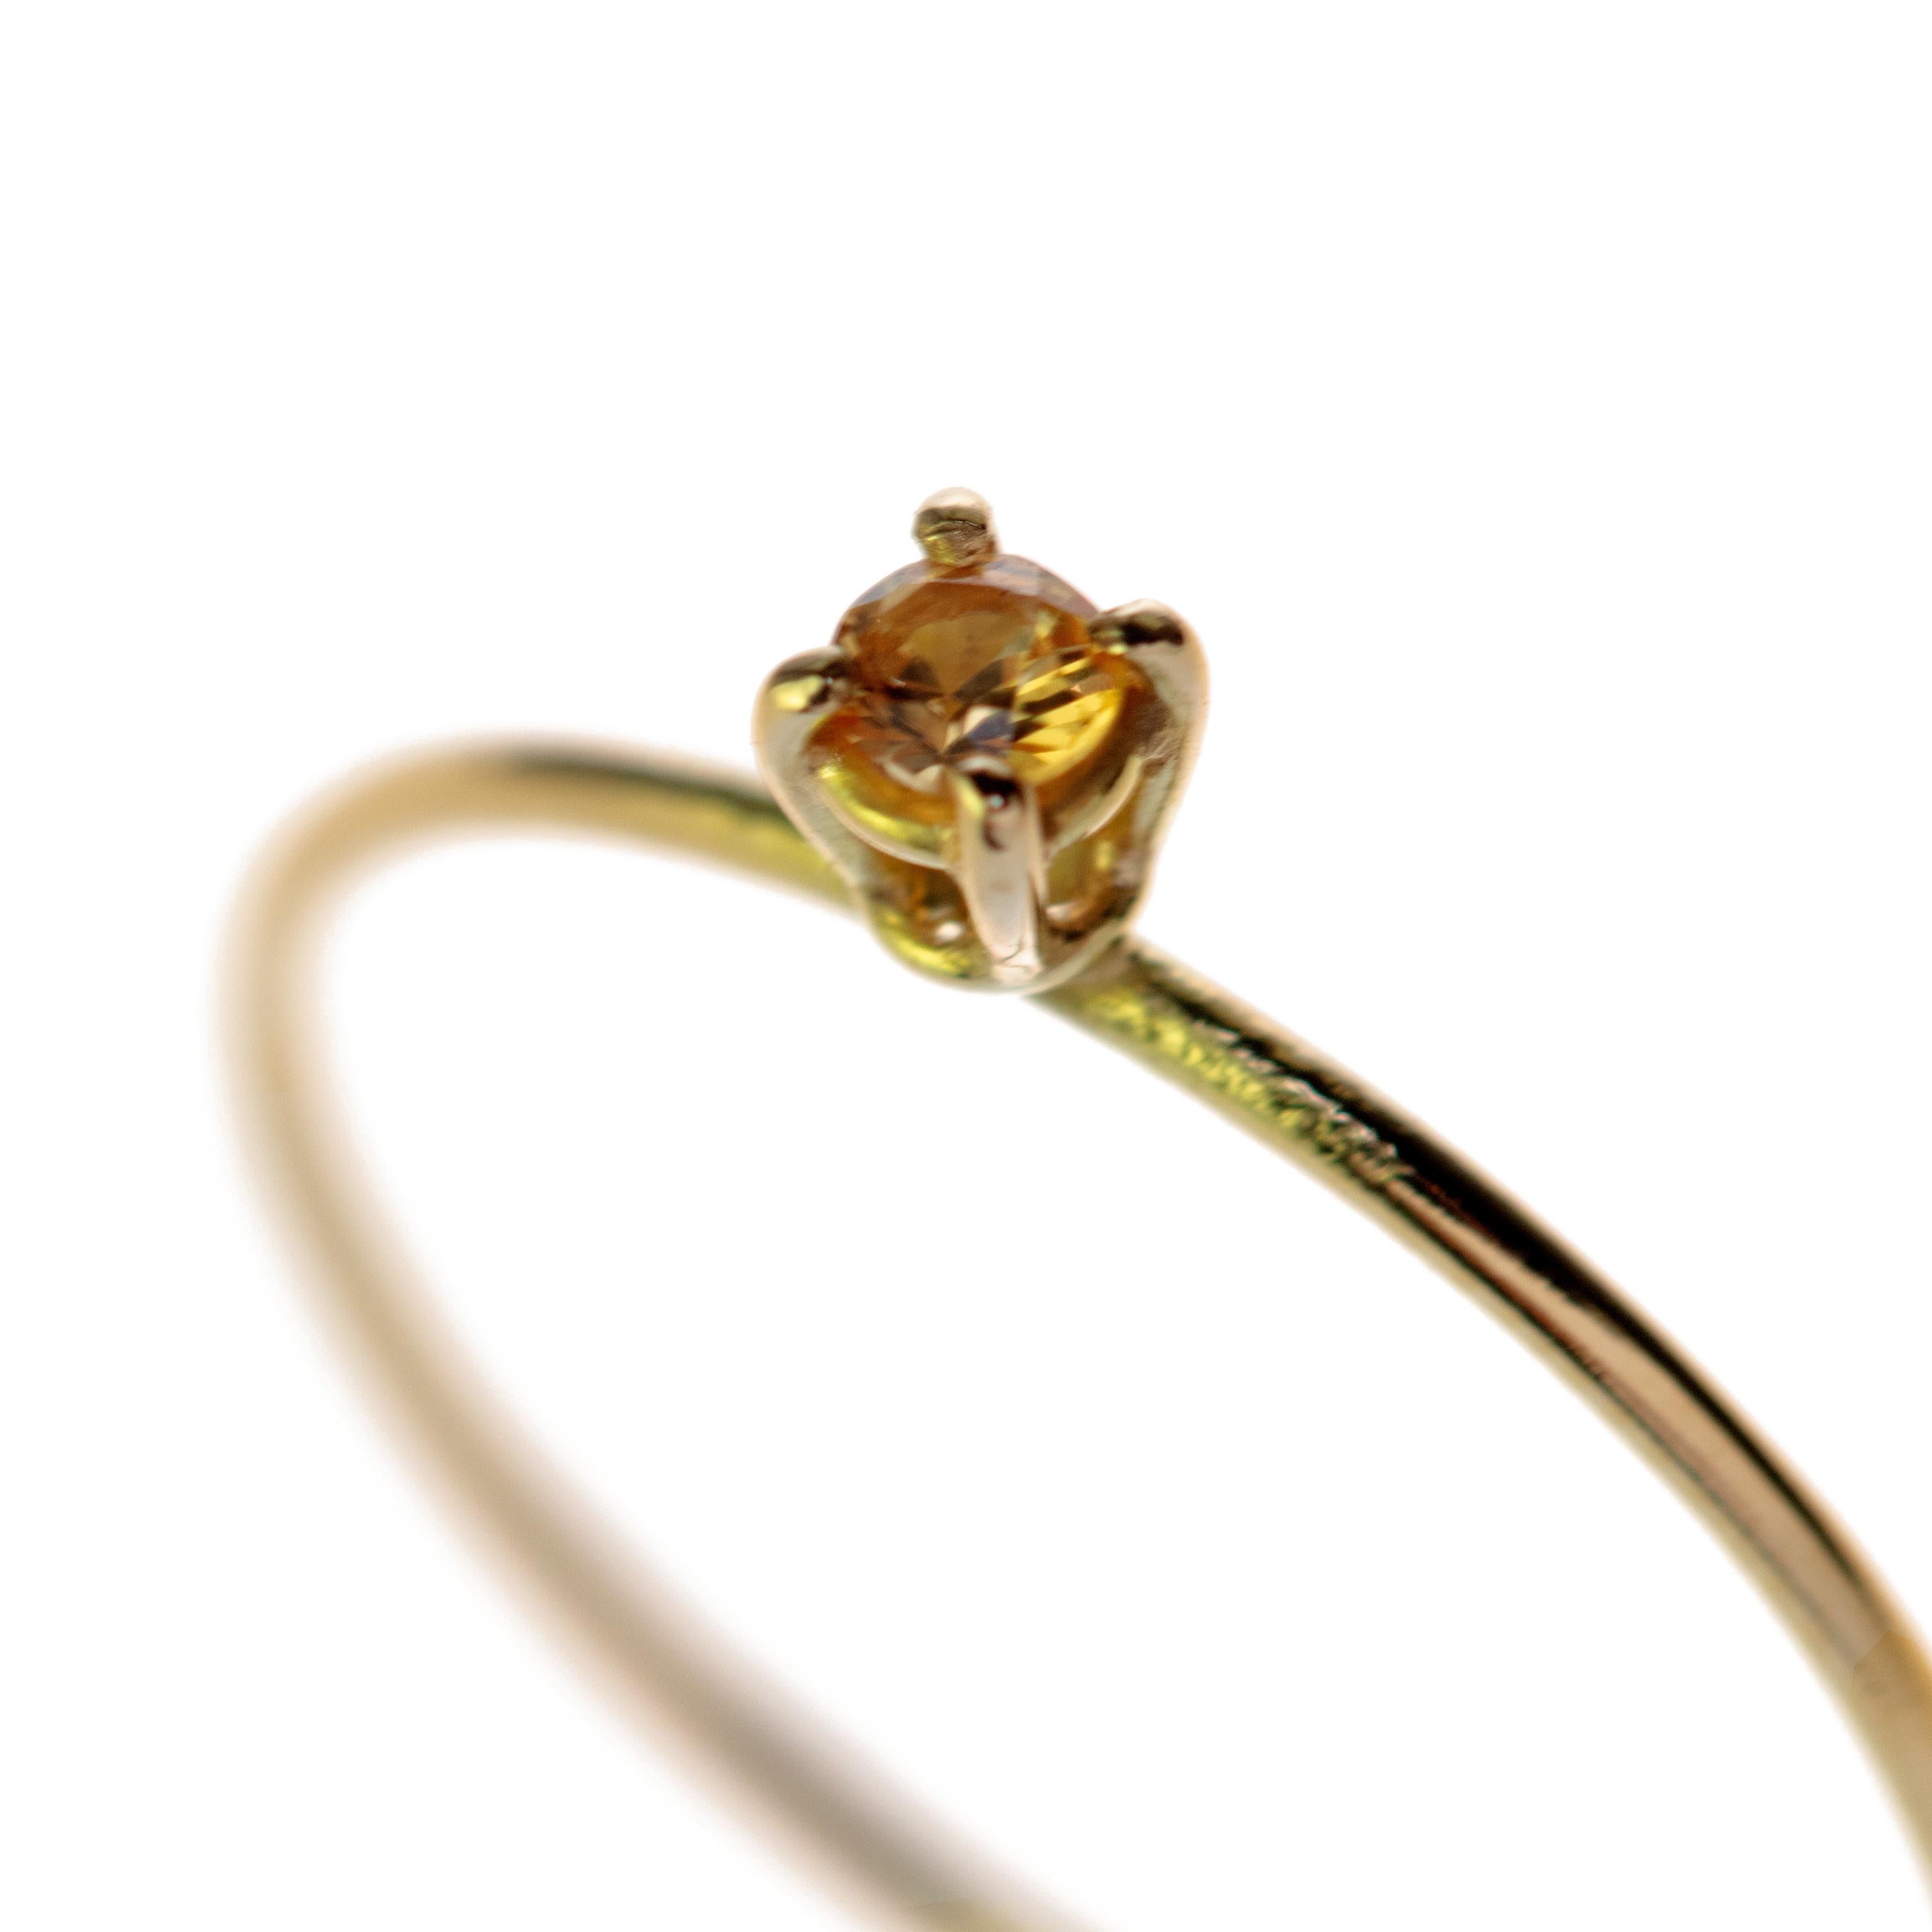 Signature INTINI Jewels yellow sapphire jewellery. Modern and elegant ring design in 14k yellow gold with an brilliant cut with tiny griffes sormounting the ring.

Yellow Sapphire represents divine grace and power. It is considered to be one of the